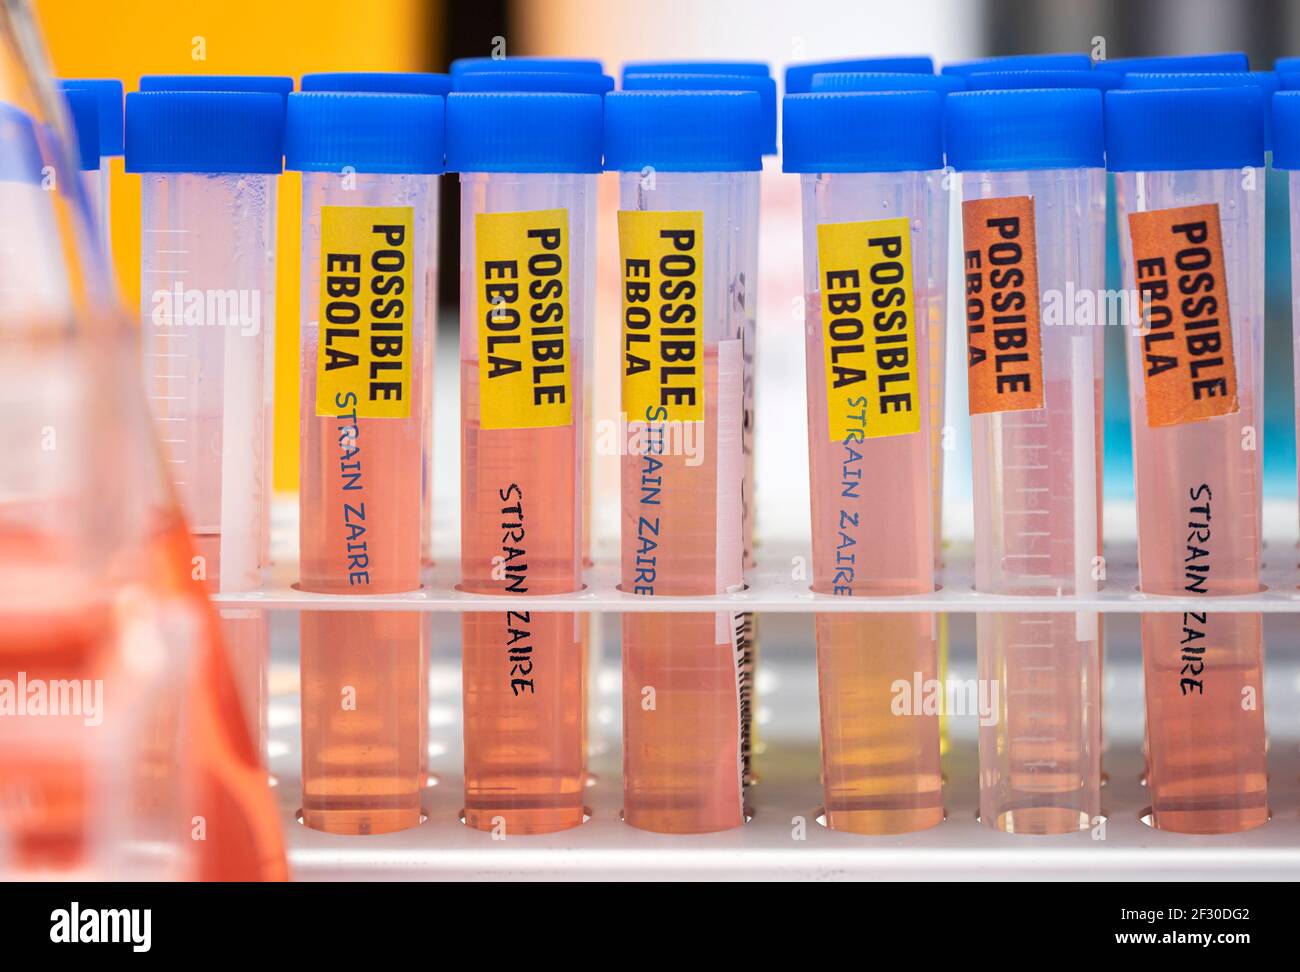 Sample vials of possible Ebola patients infected with new Zaire strain of Ebola, concept image Stock Photo